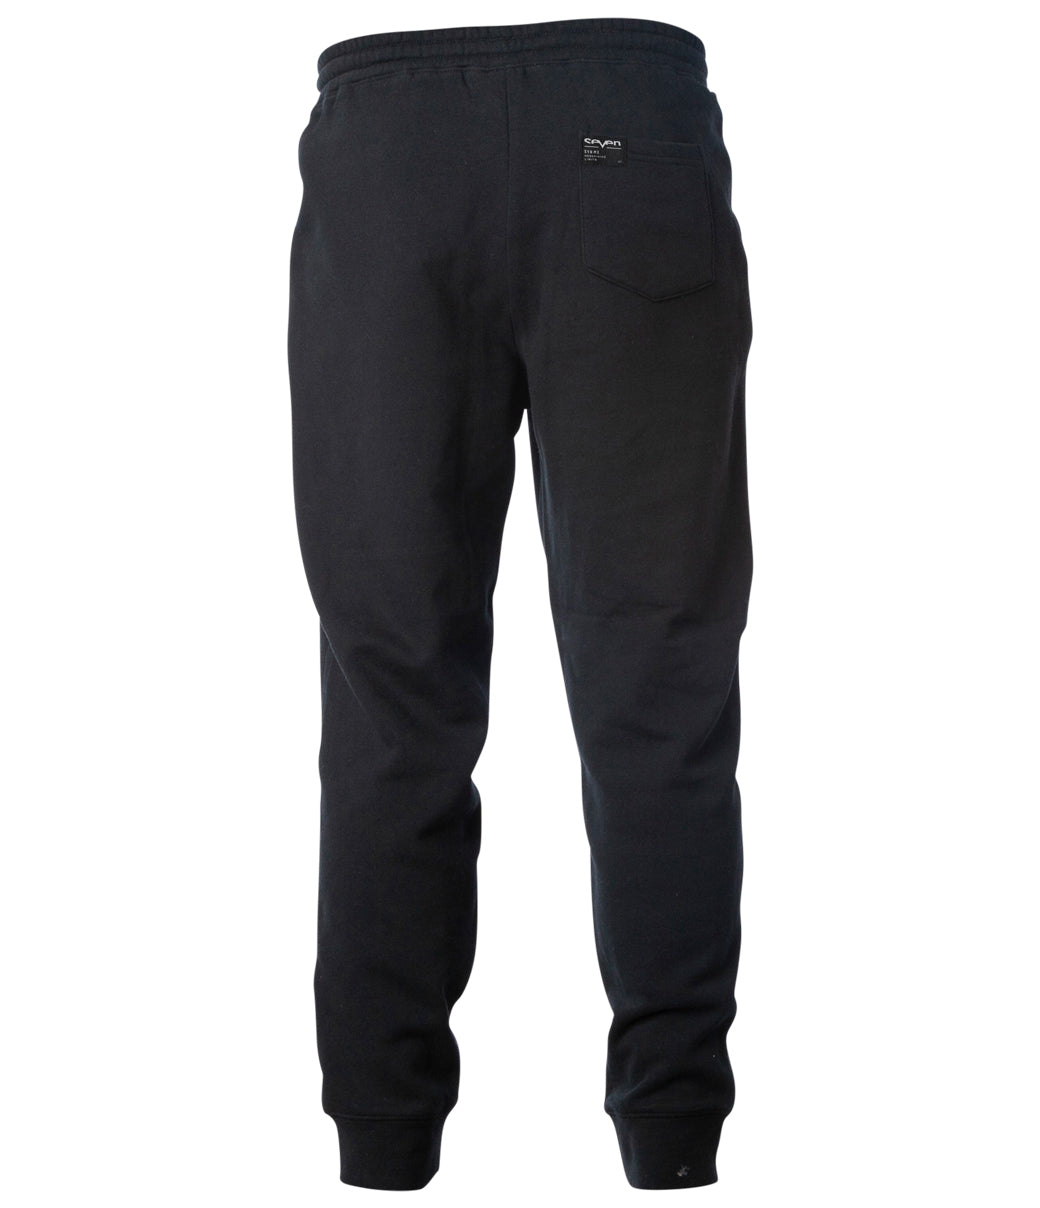 JOGGER SWEATPANTS - Independent Trading Company Size Chart